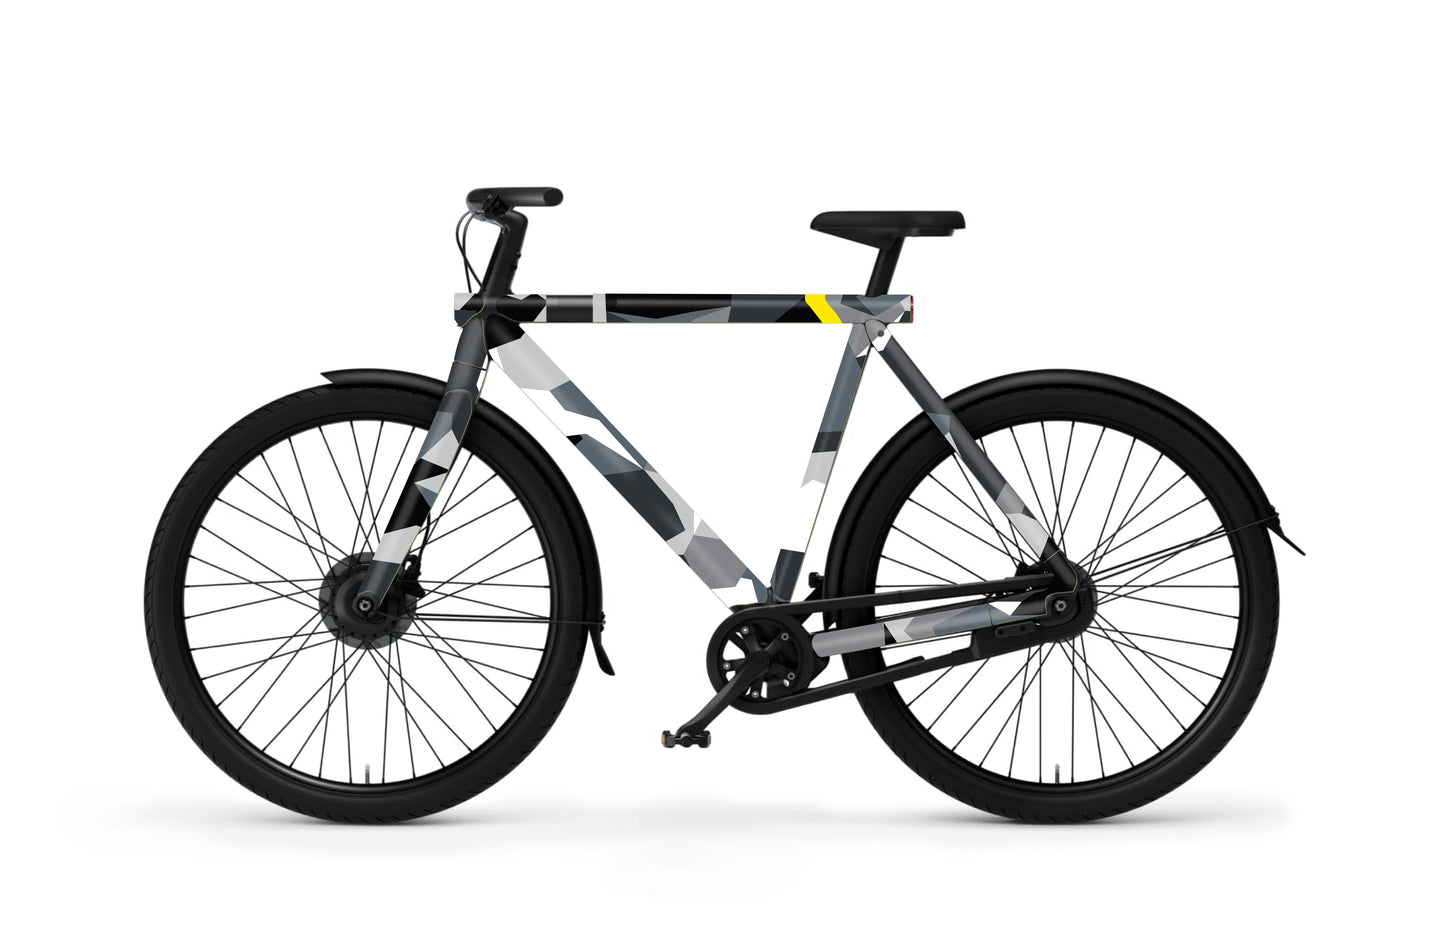 GRAY CAMO PROTECT KIT FOR VANMOOF S2/S3